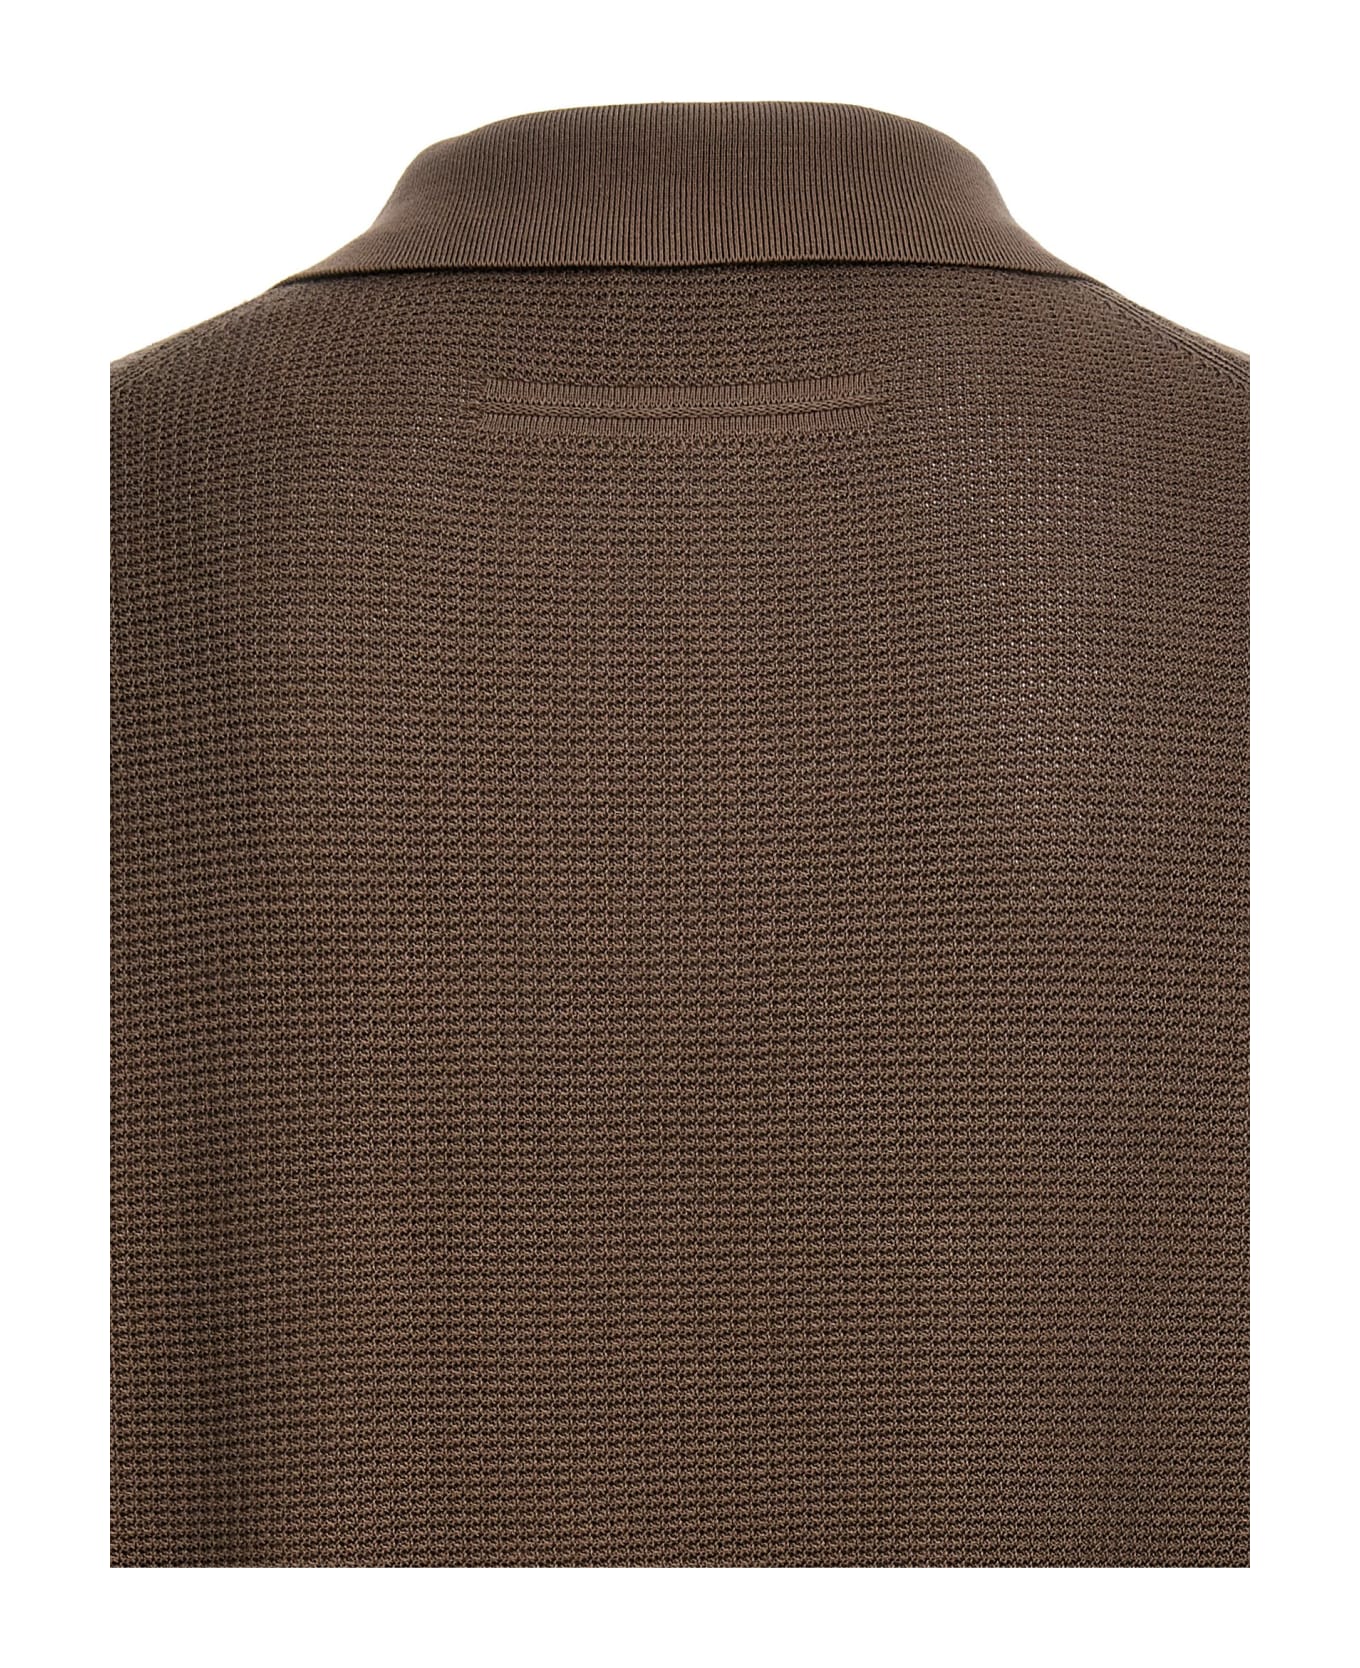 Zegna Knitted Polo Shirt - Green